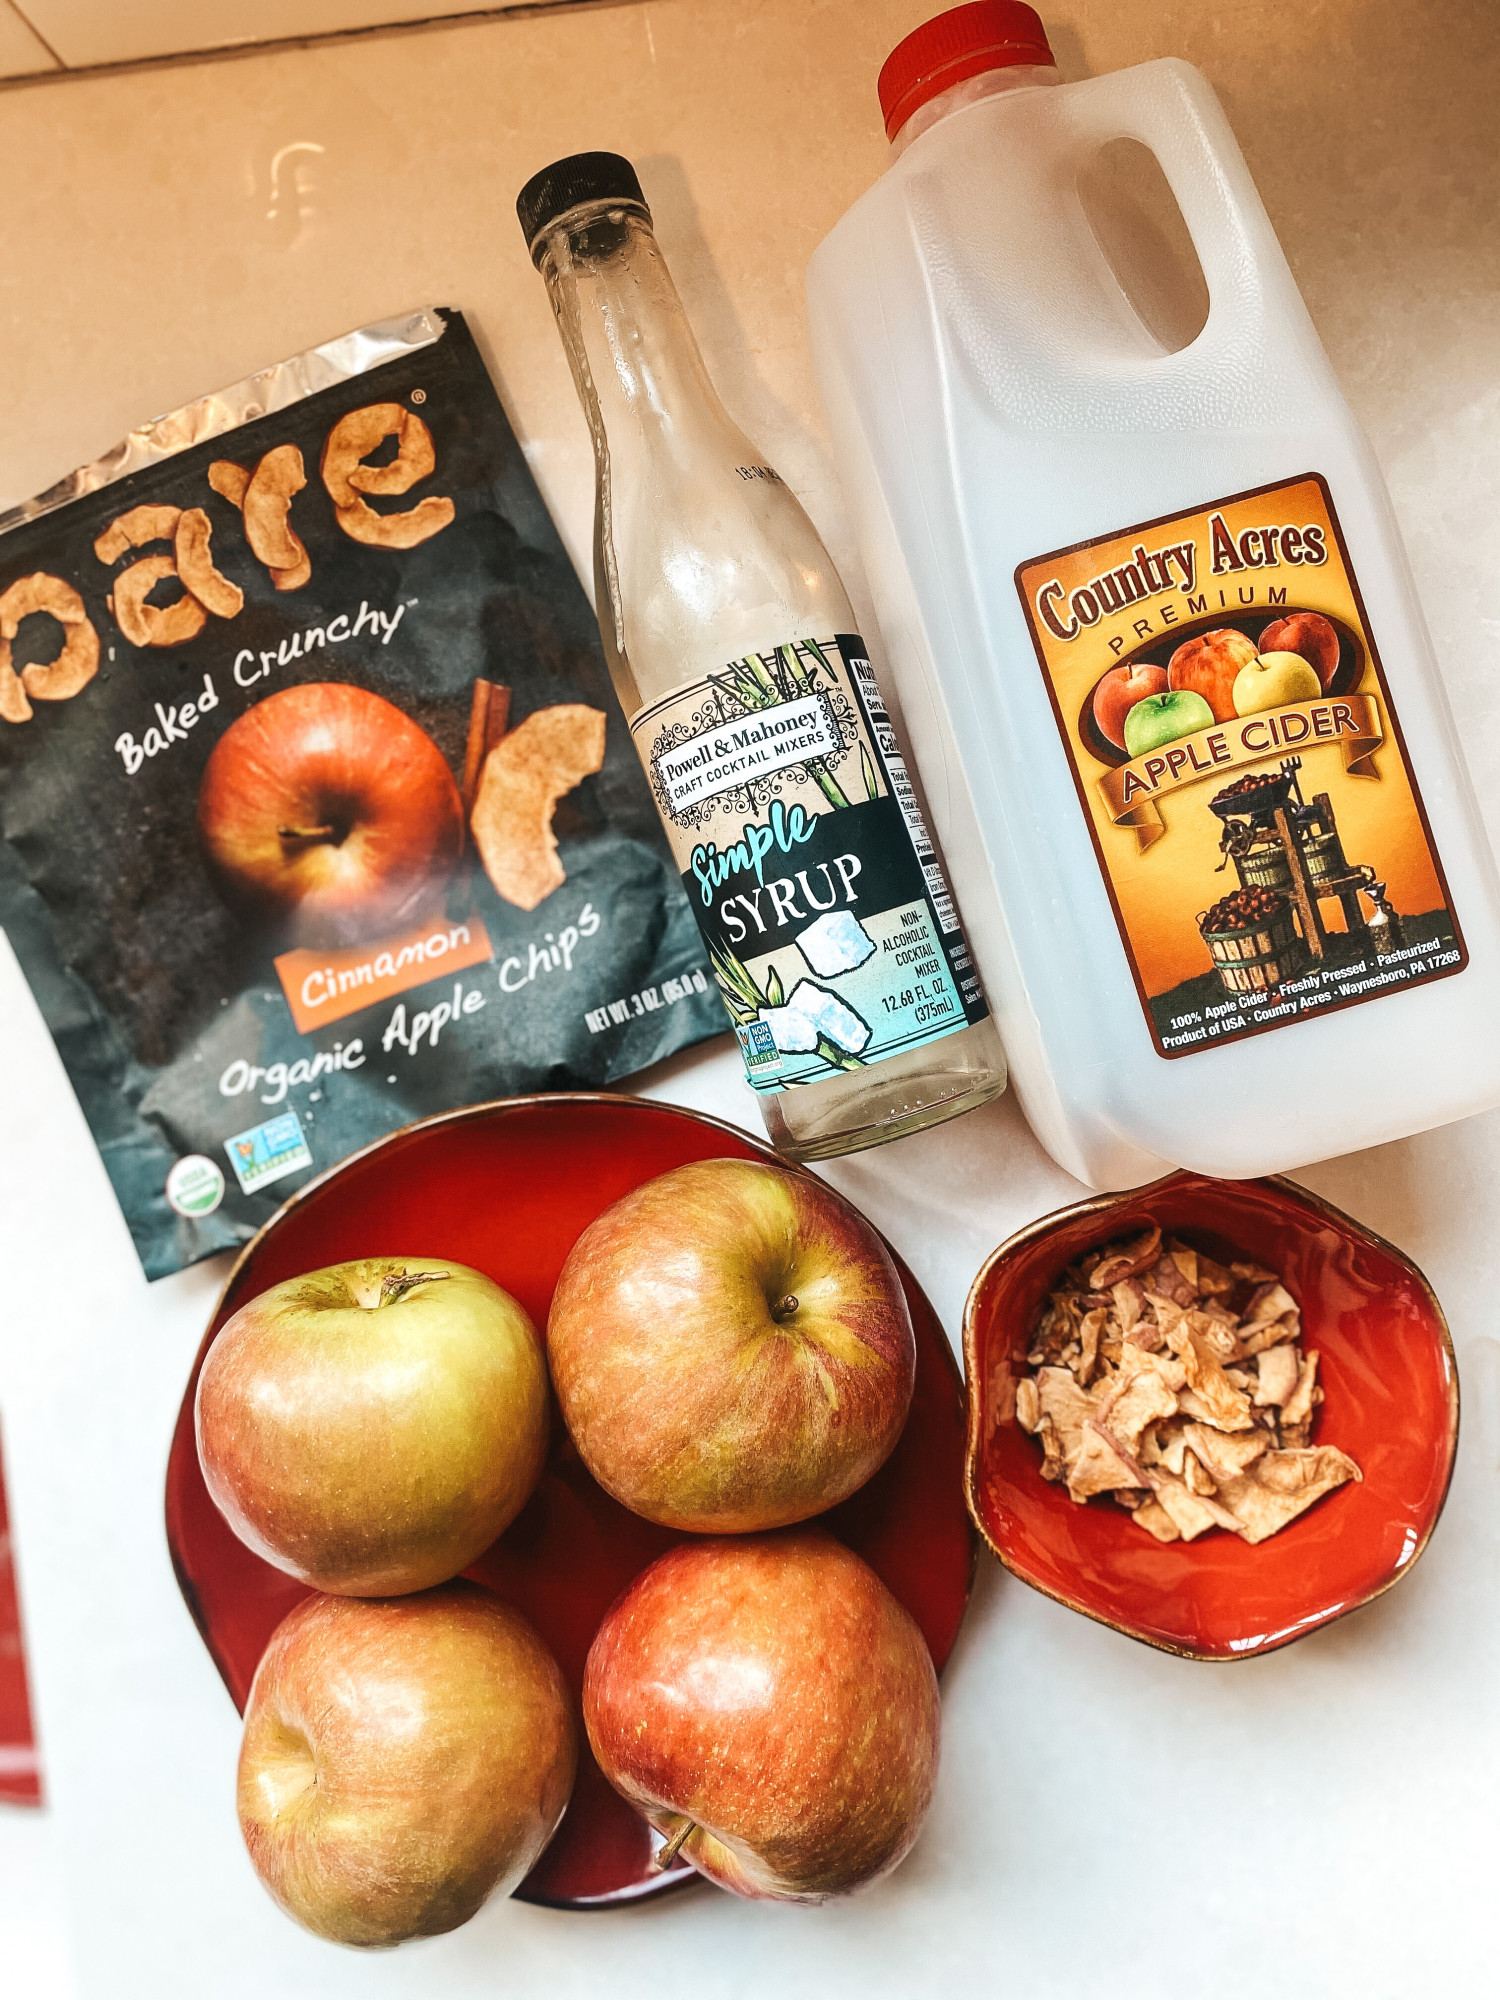 All the necesary ingredients to make this apple cider mocktail